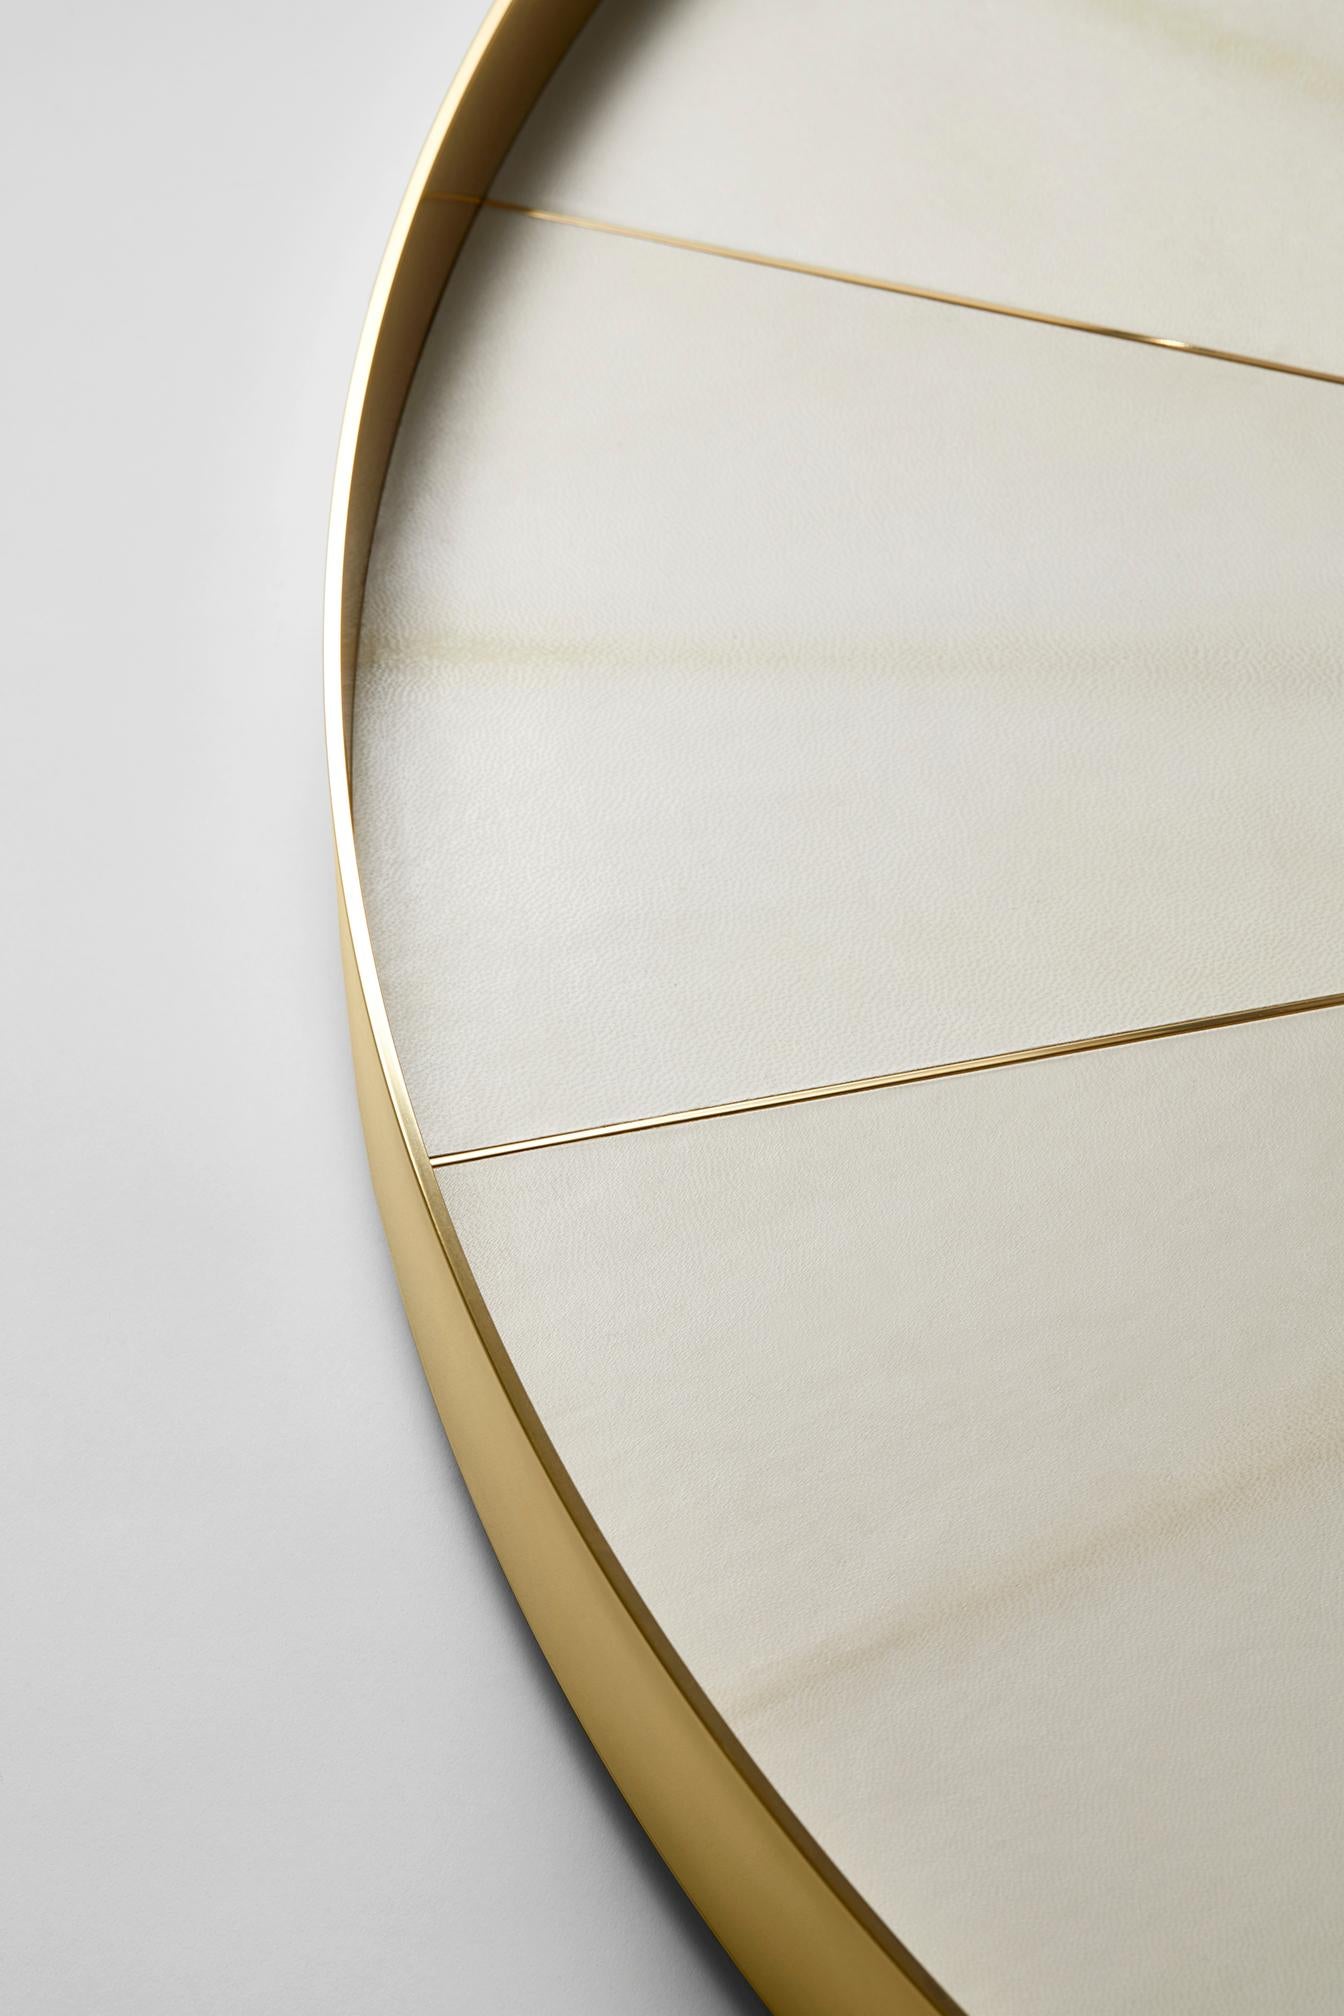 French Round Mirror Saint Germain in Parchment and Polished Brass by Hervé Langlais For Sale